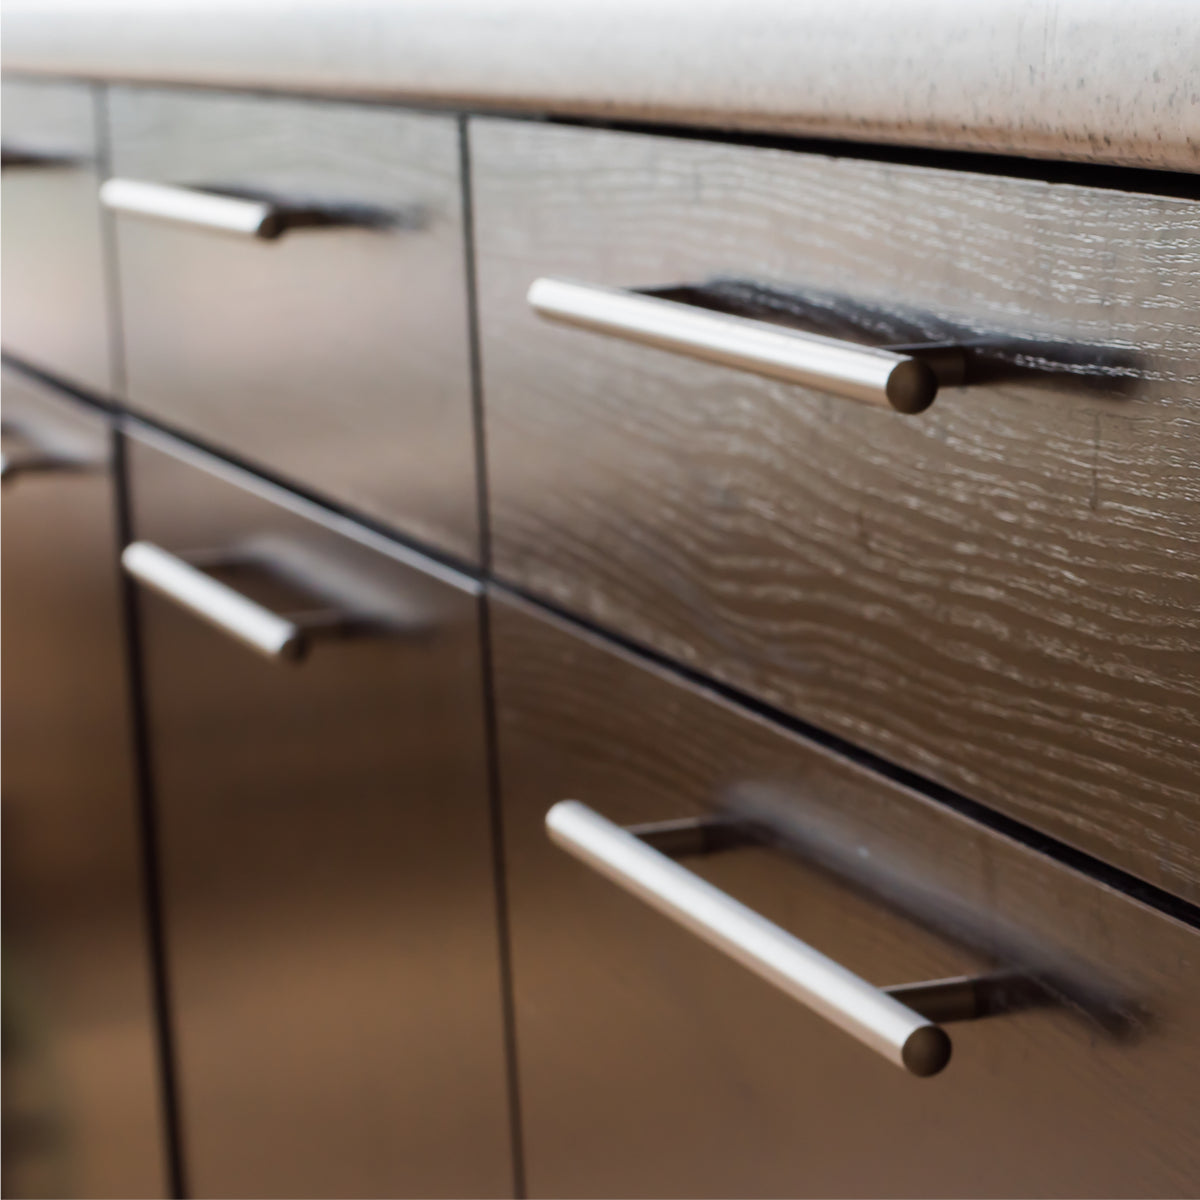 How To Choose The Best Size Pulls For Your Kitchen Cabinets Doors 